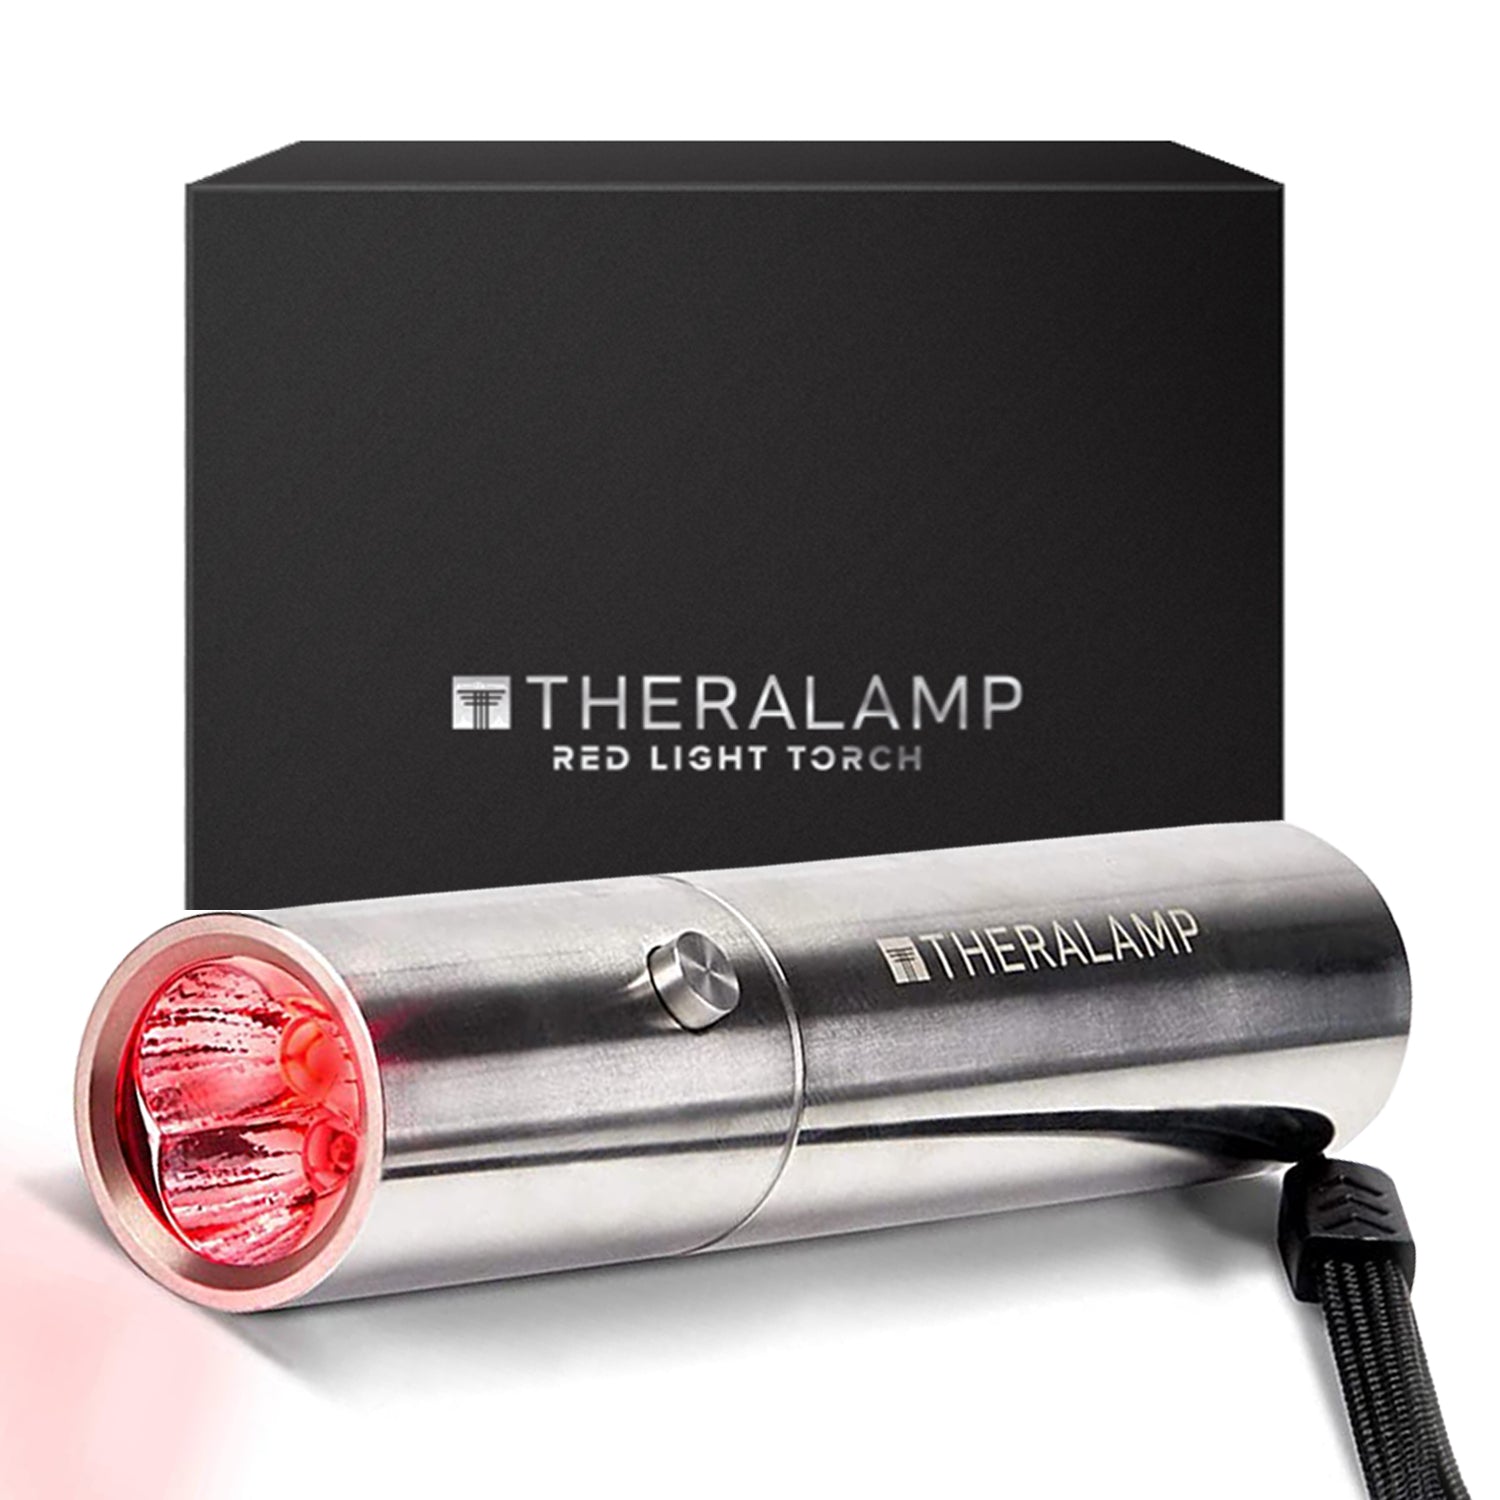 Red Light Torch by Theralamp - Handheld Medical Grade Infrared LED Light - Targeted Joint and Muscle Pain Relief - 630nm, 660nm, 850nm Wavelengths - 3000mw Rechargeable